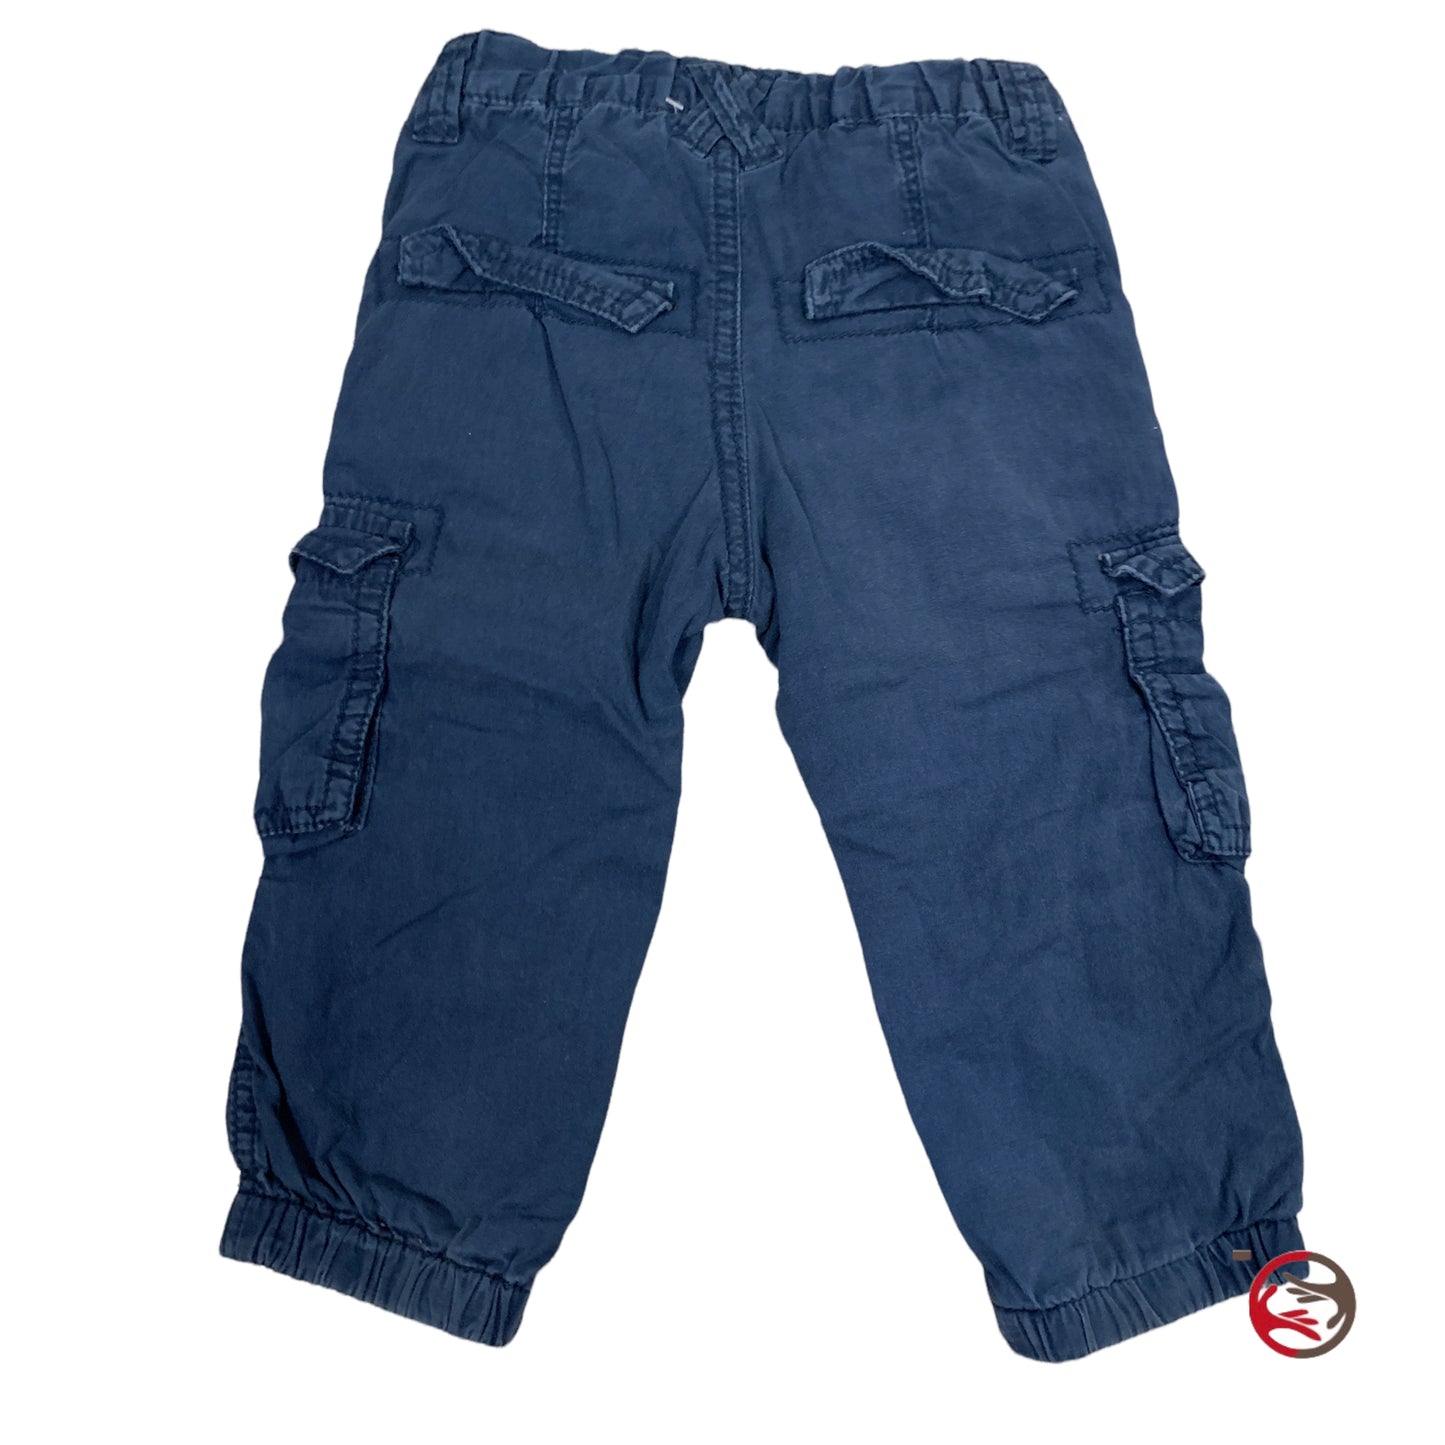 Dodipetto blue trousers for 18 month baby